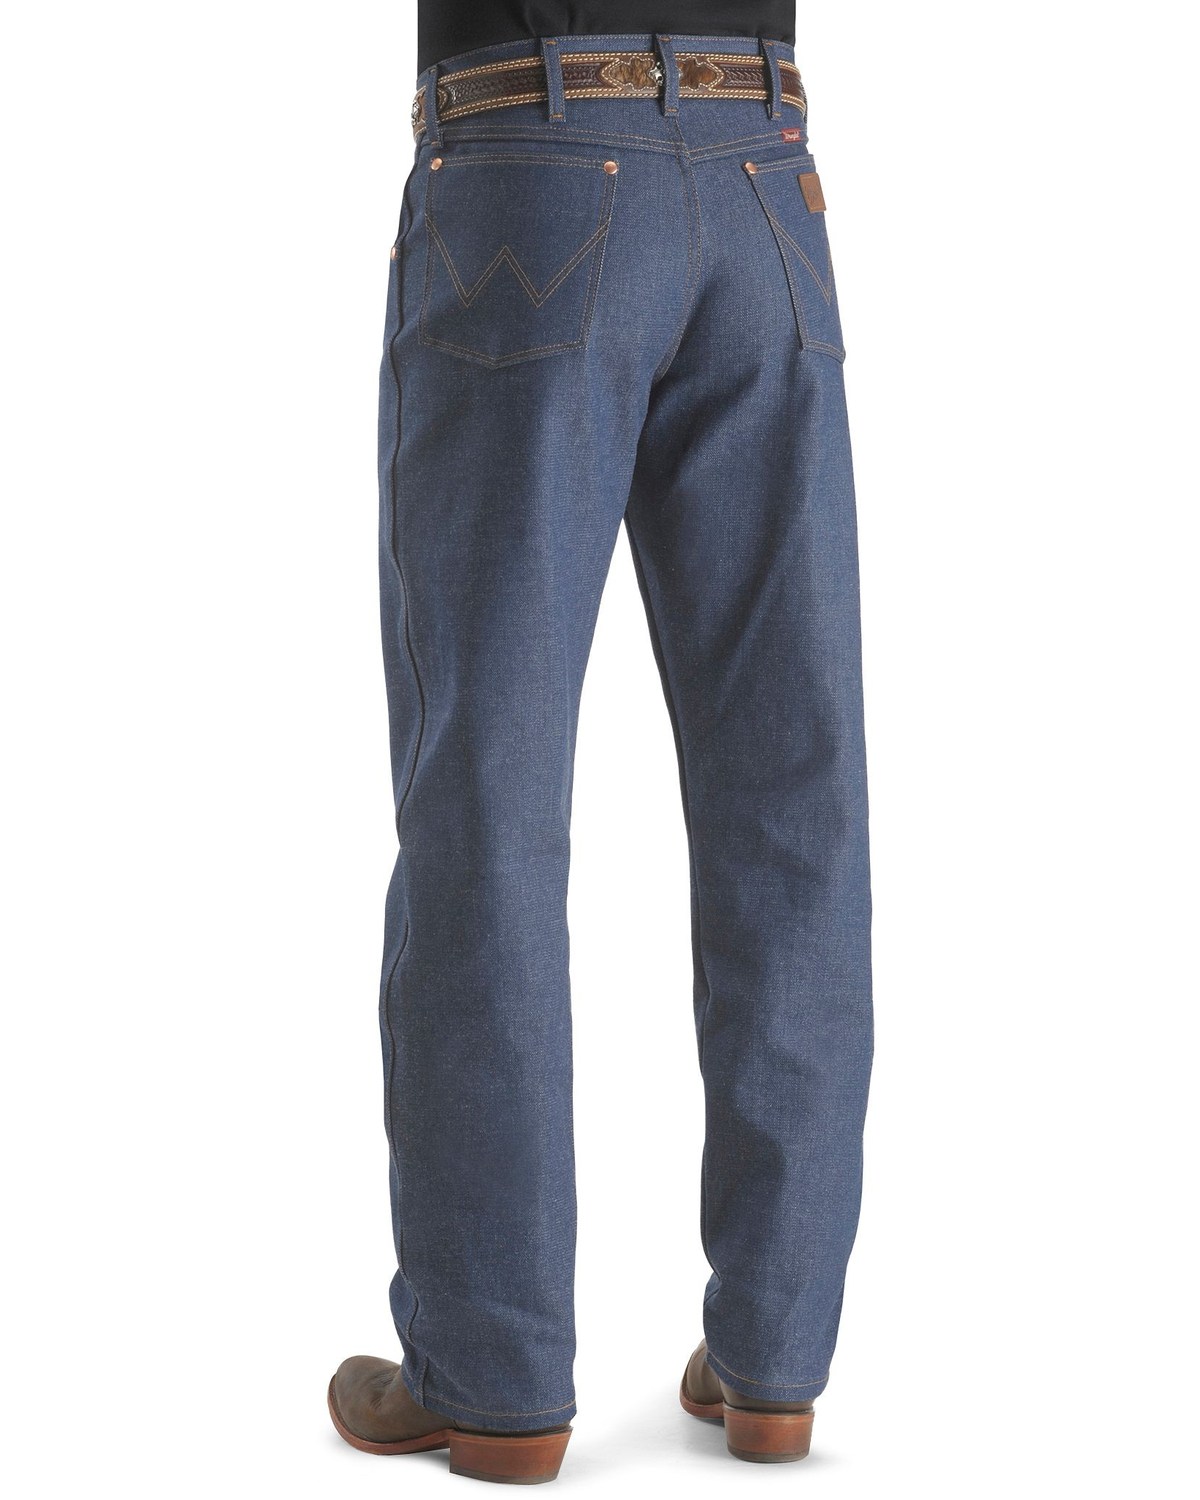 wrangler relaxed fit jeans big and tall